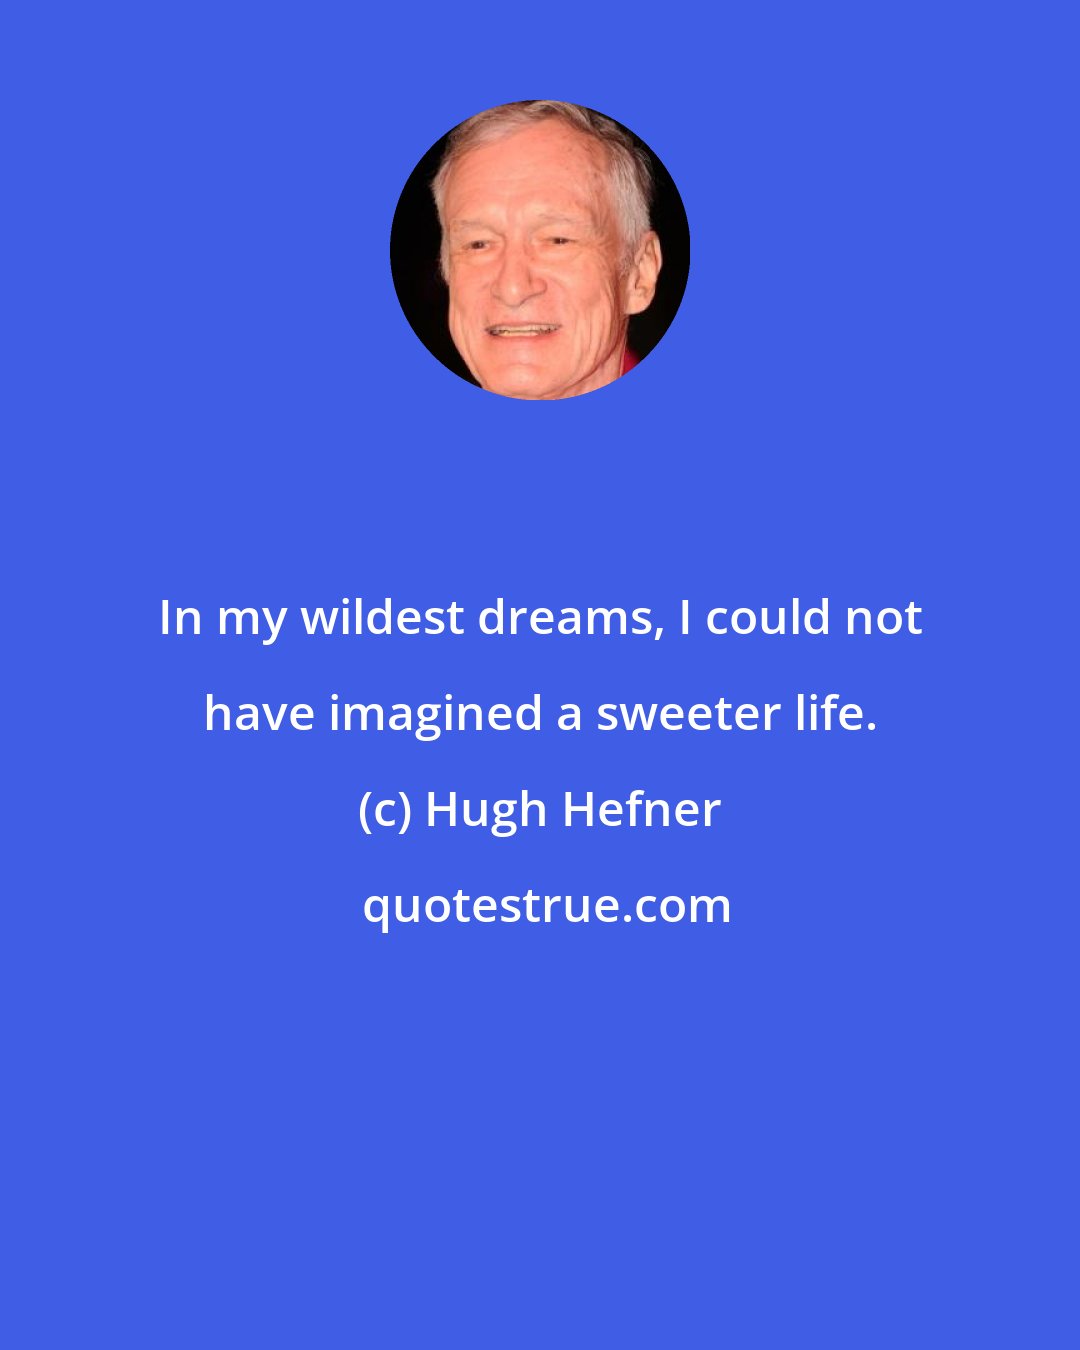 Hugh Hefner: In my wildest dreams, I could not have imagined a sweeter life.